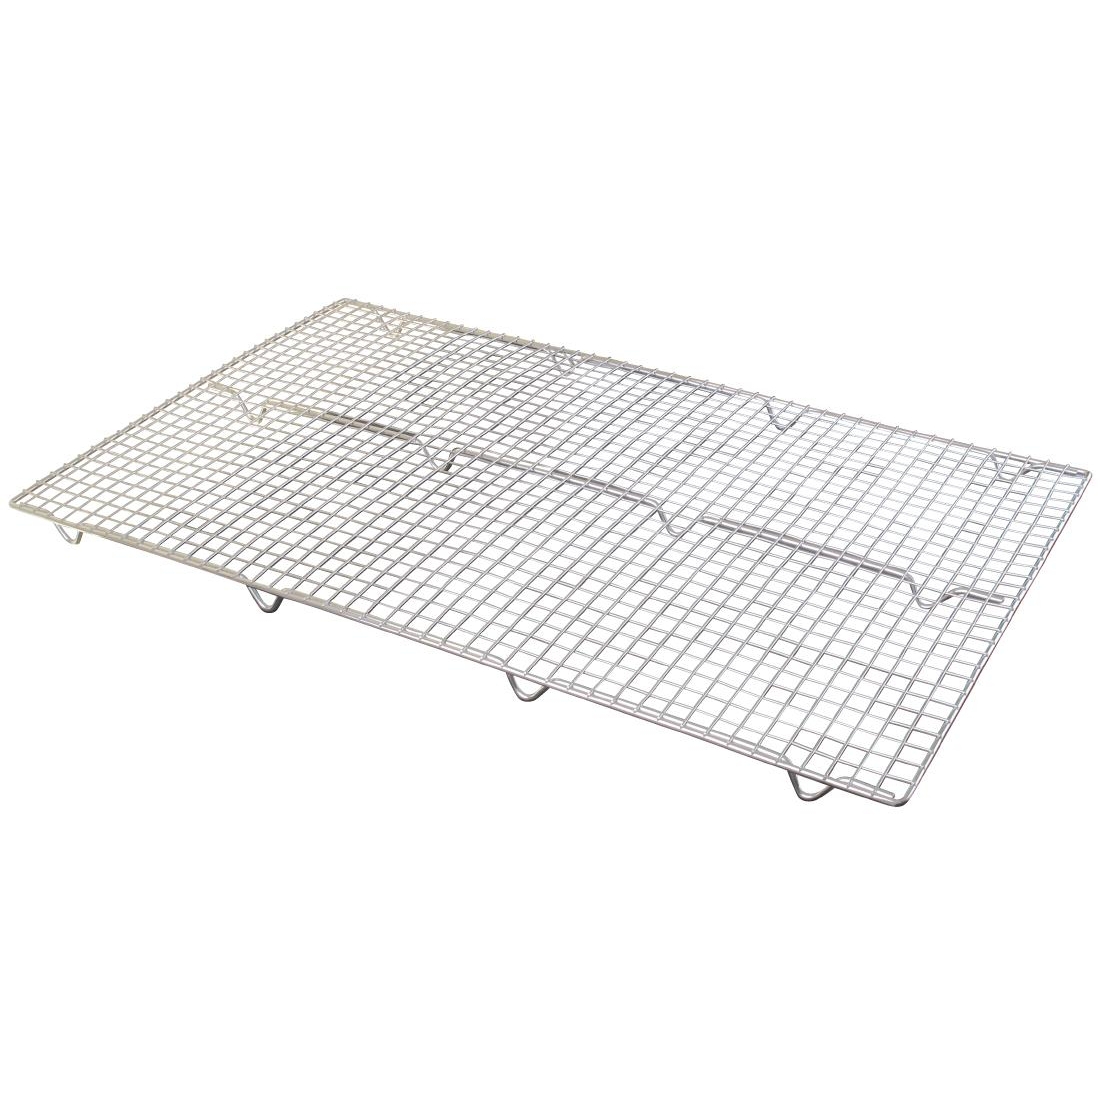 Vogue Heavy Duty Cake Cooling Tray 64x41cm